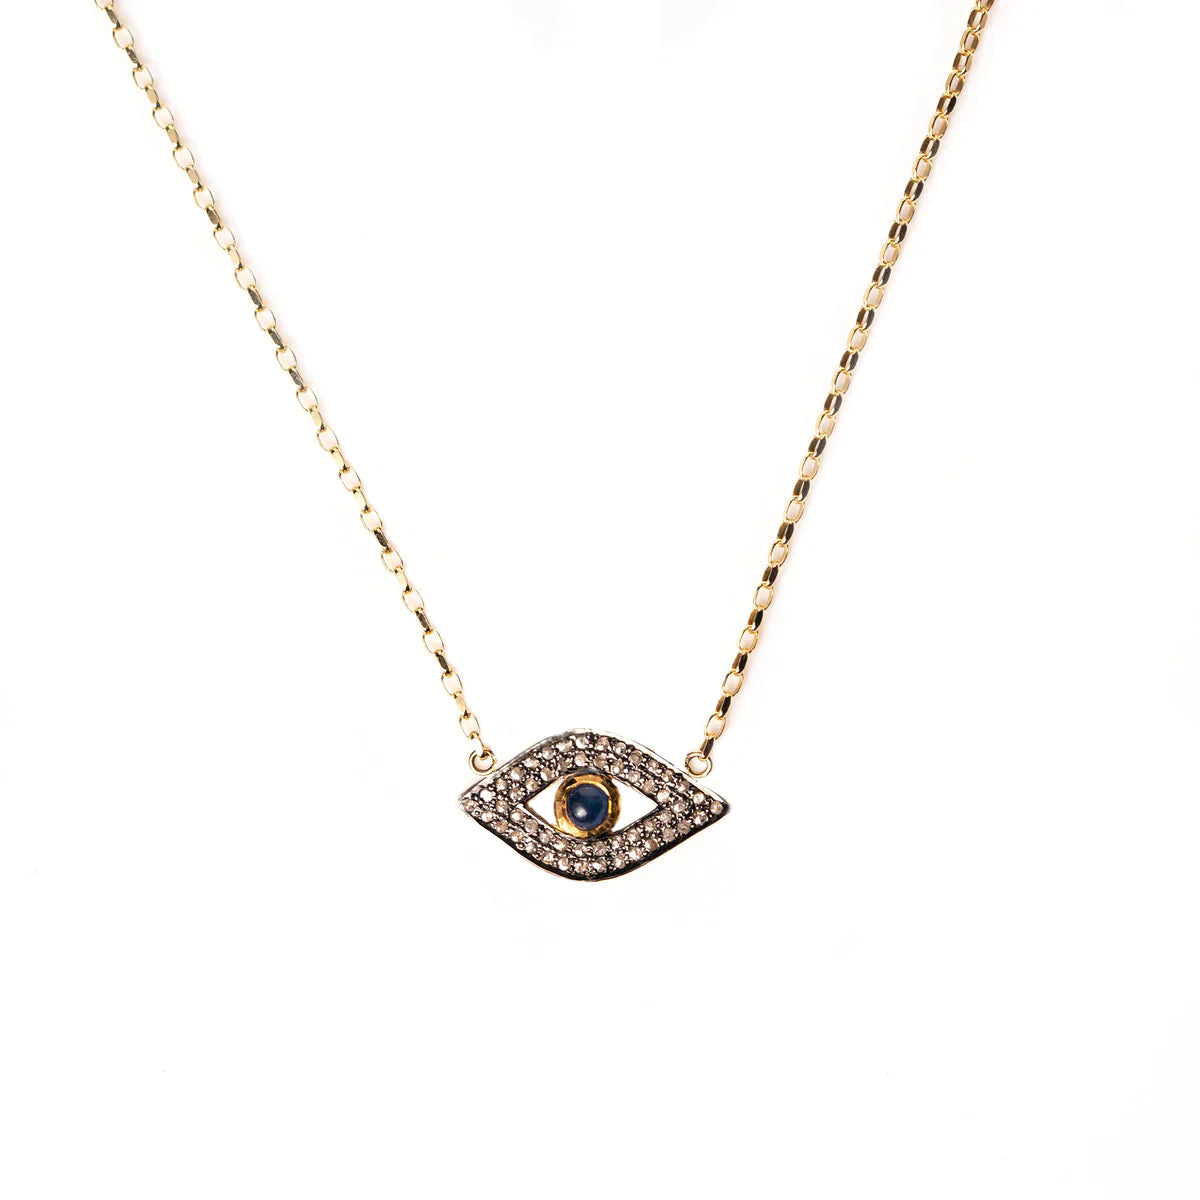 Evil eye pendant necklace on gold plated chain with sapphire centre stone